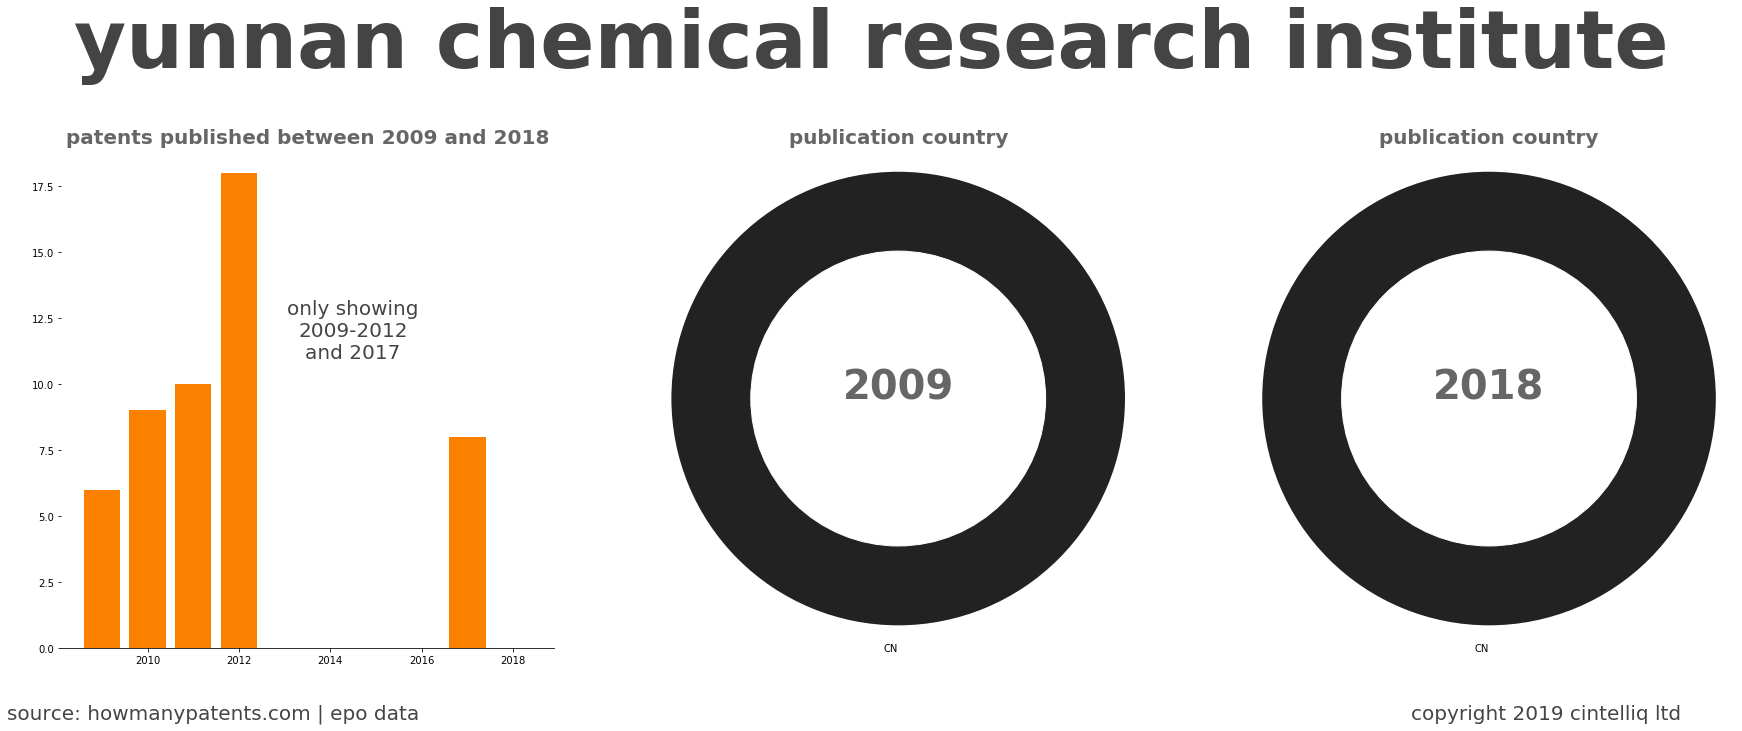 summary of patents for Yunnan Chemical Research Institute